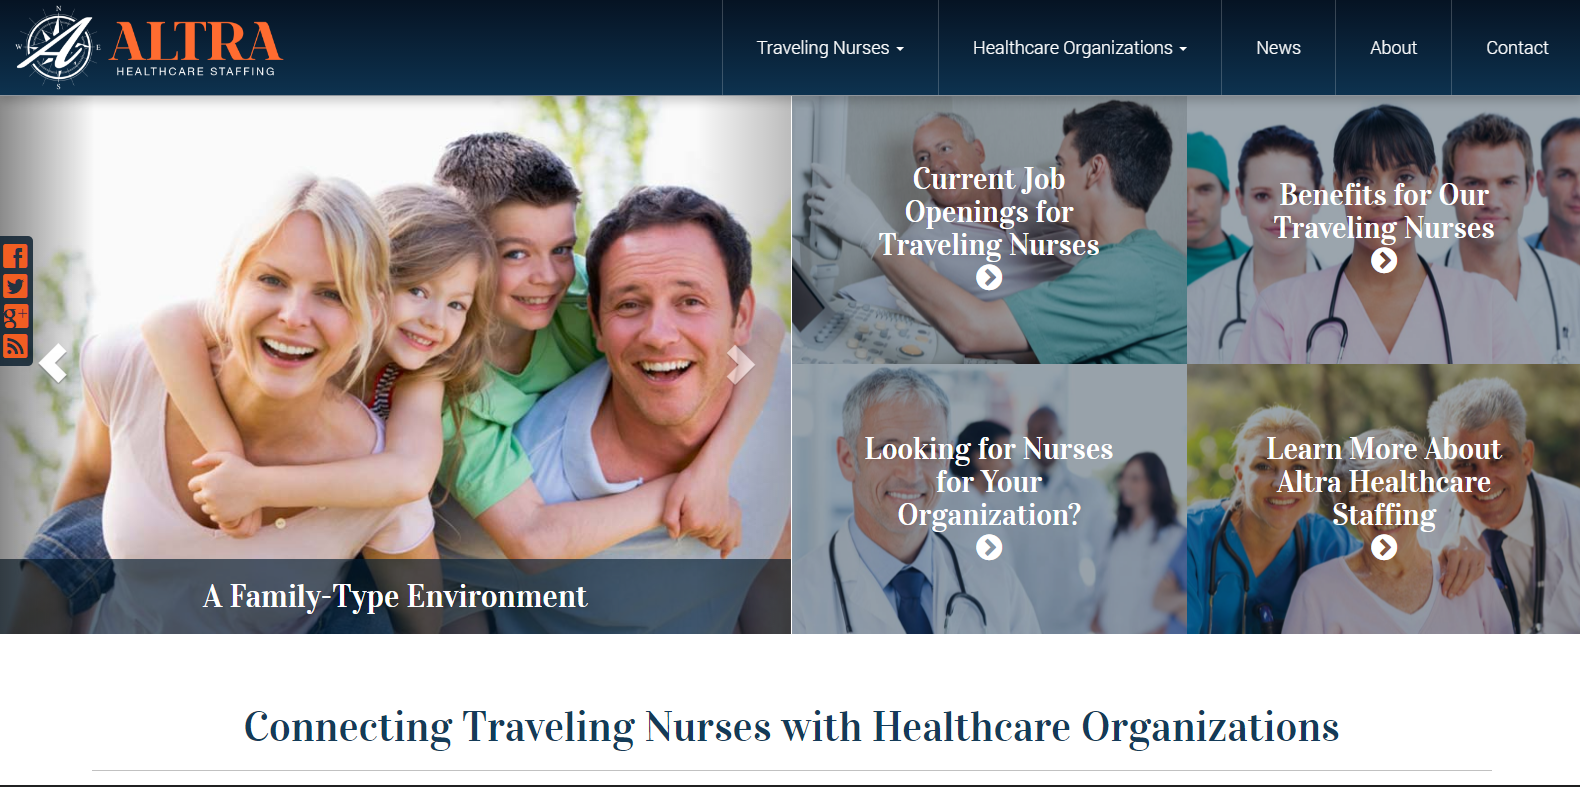 
New Website Launched: Altra Healthcare Staffing